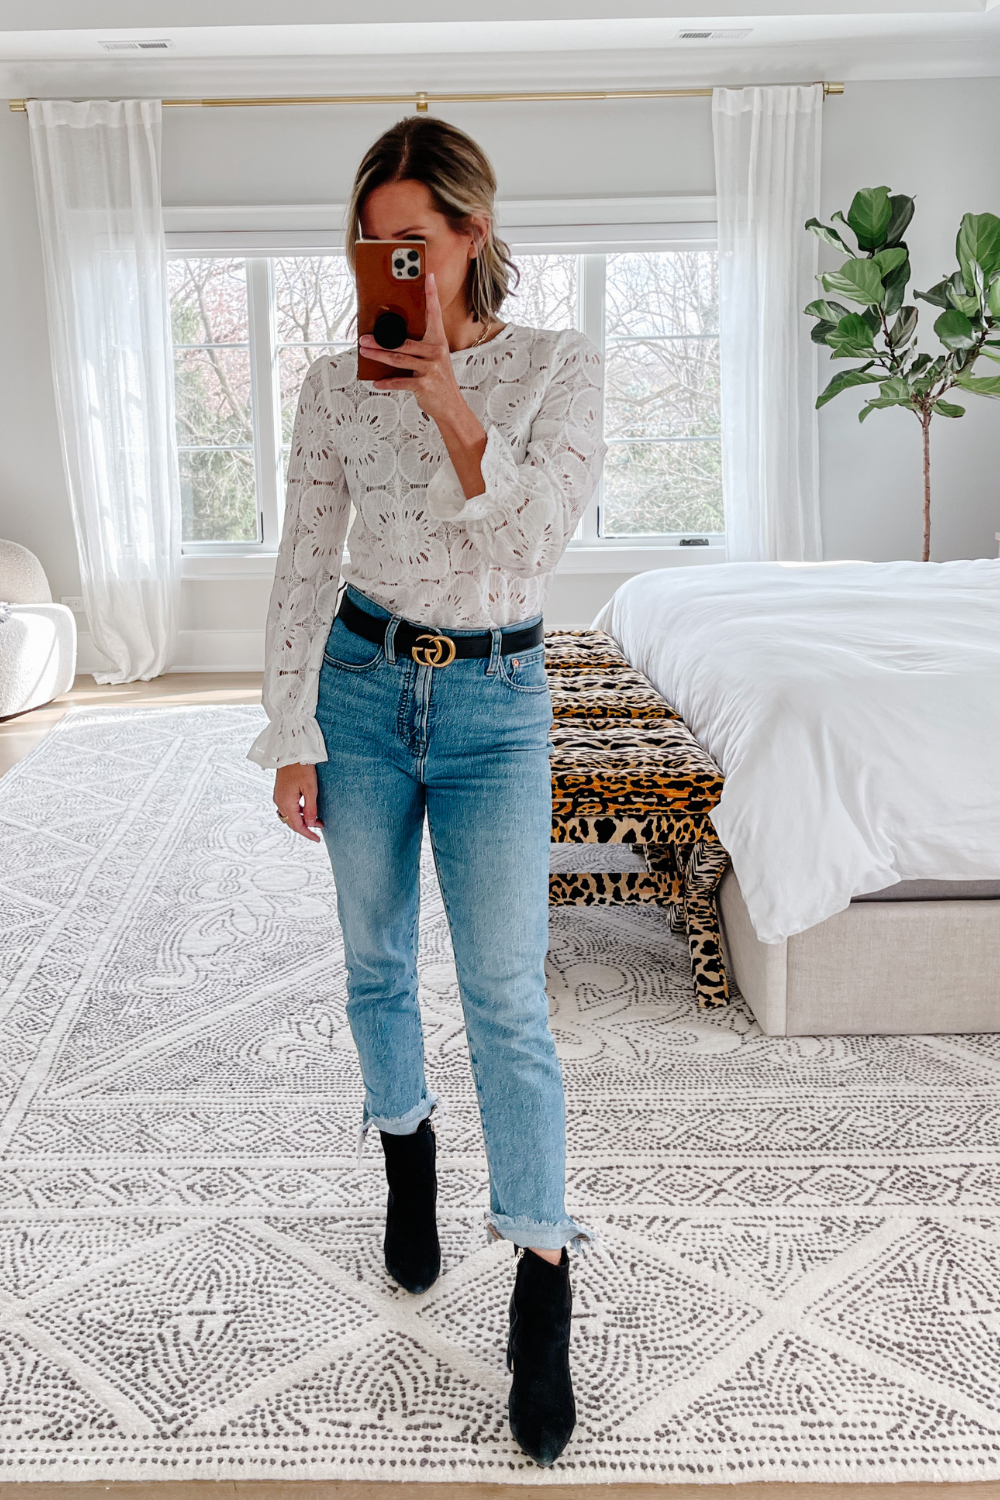 Suzanne wearing an embroidered floral blouse and denim jeans